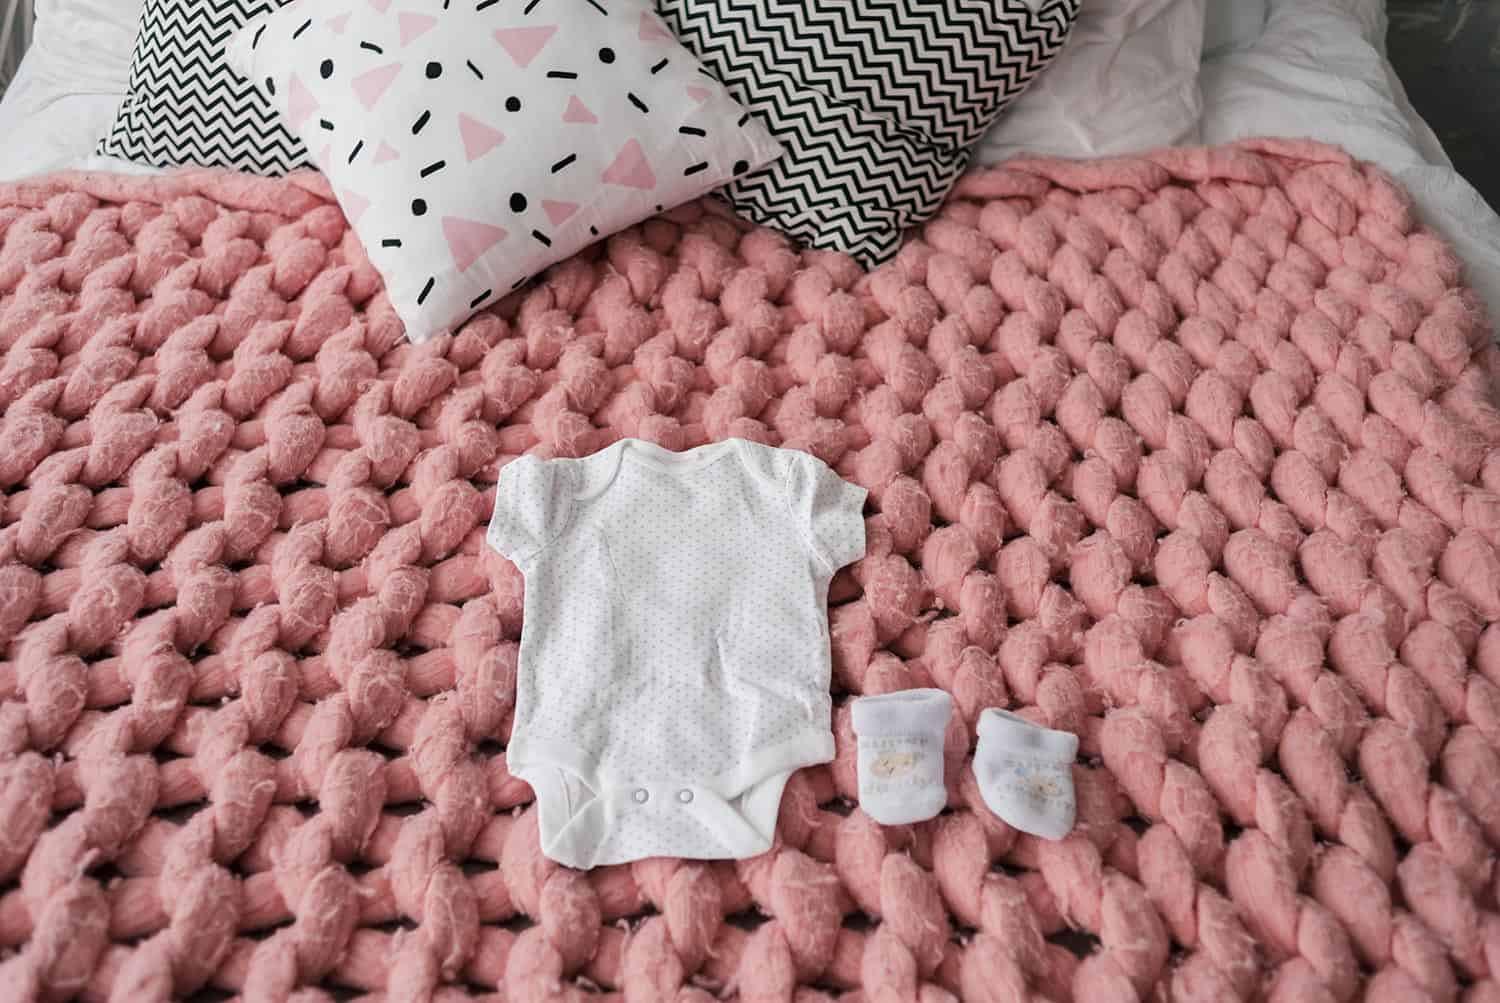 Baby clothes and shoes for newborn in pastel colors on pink merino wool blanket